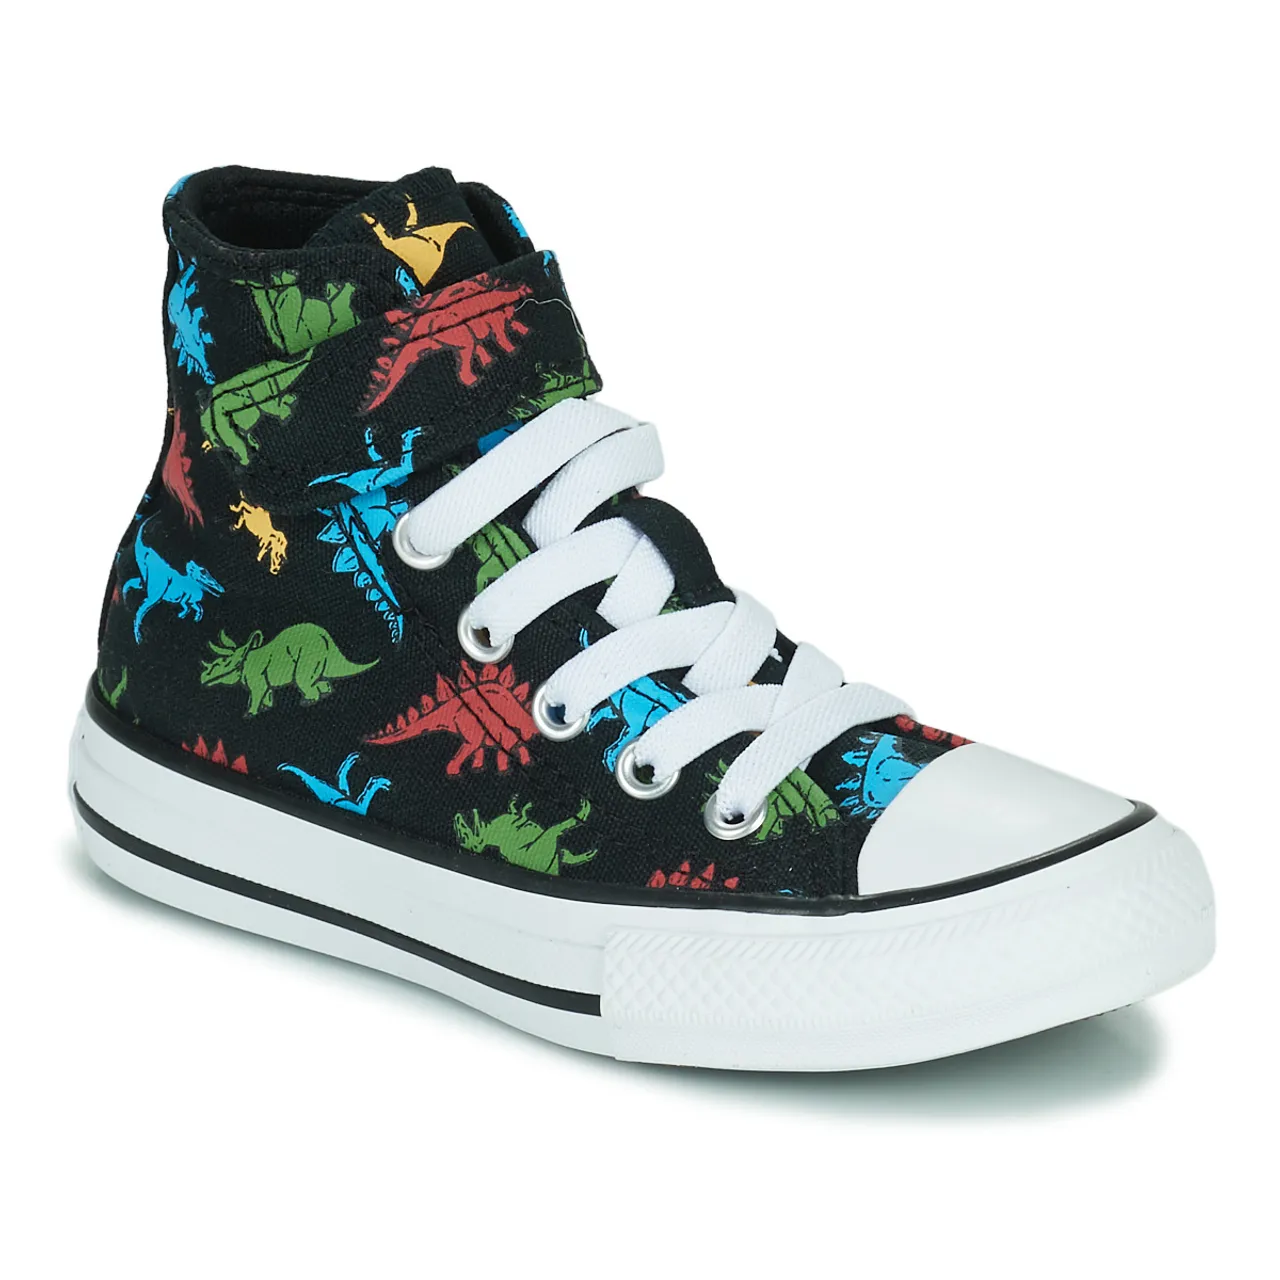 Converse  Chuck Taylor All Star 1V Dinosaurs Hi  boys's Children's Shoes (High-top Trainers) in Multicolour